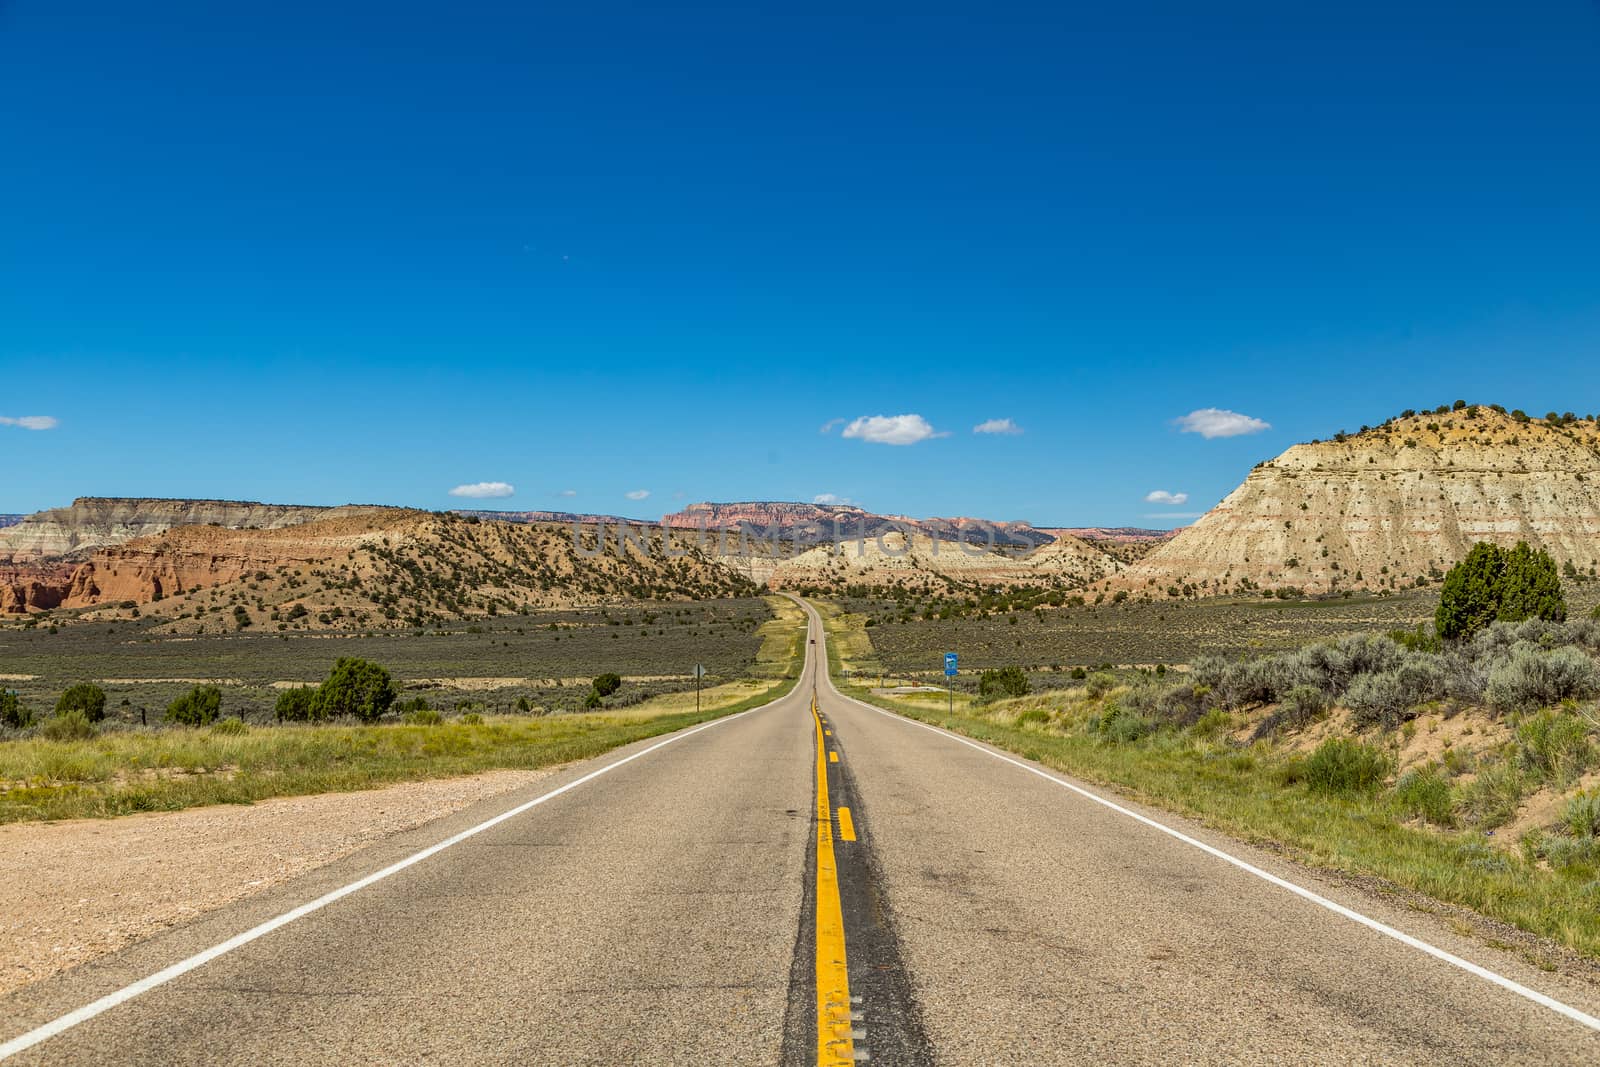 Highway 12 is one of the most scenic highways in America, receiving the designation of 'All American Road' in 2002. The highway has two National Parks, Bryce Canyon and Capitol Reef, at each end and many other scenic points in between.